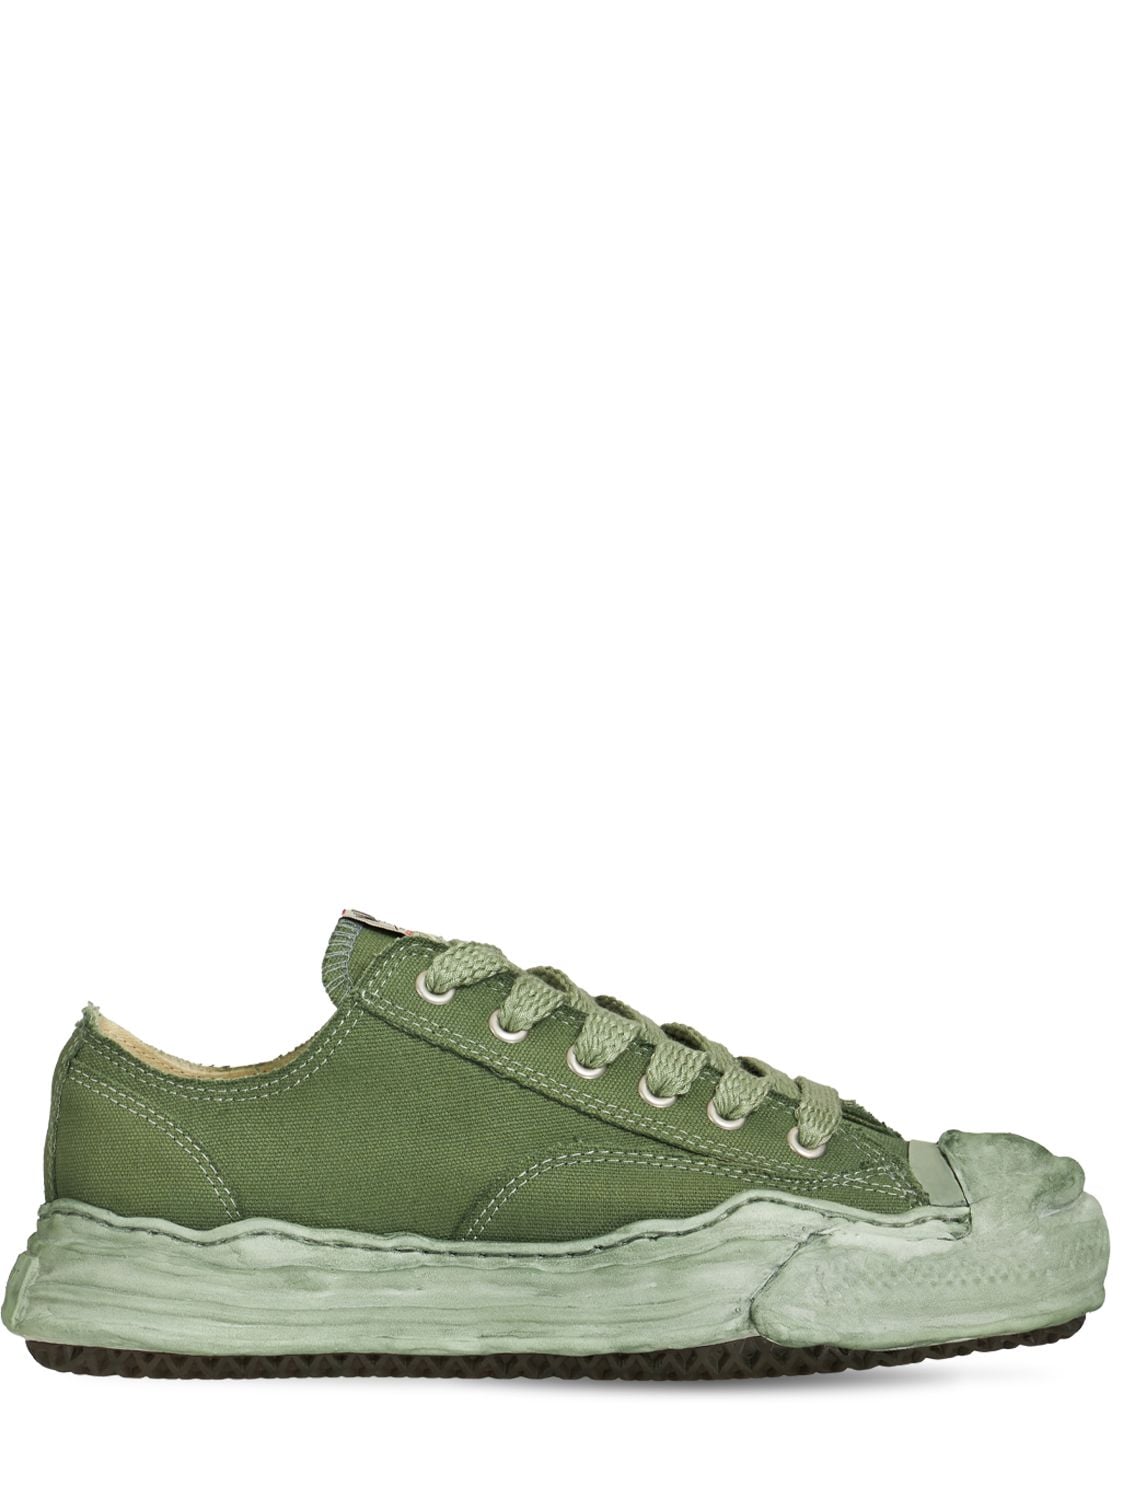 Hank Over Dyed Canvas Low Sneakers